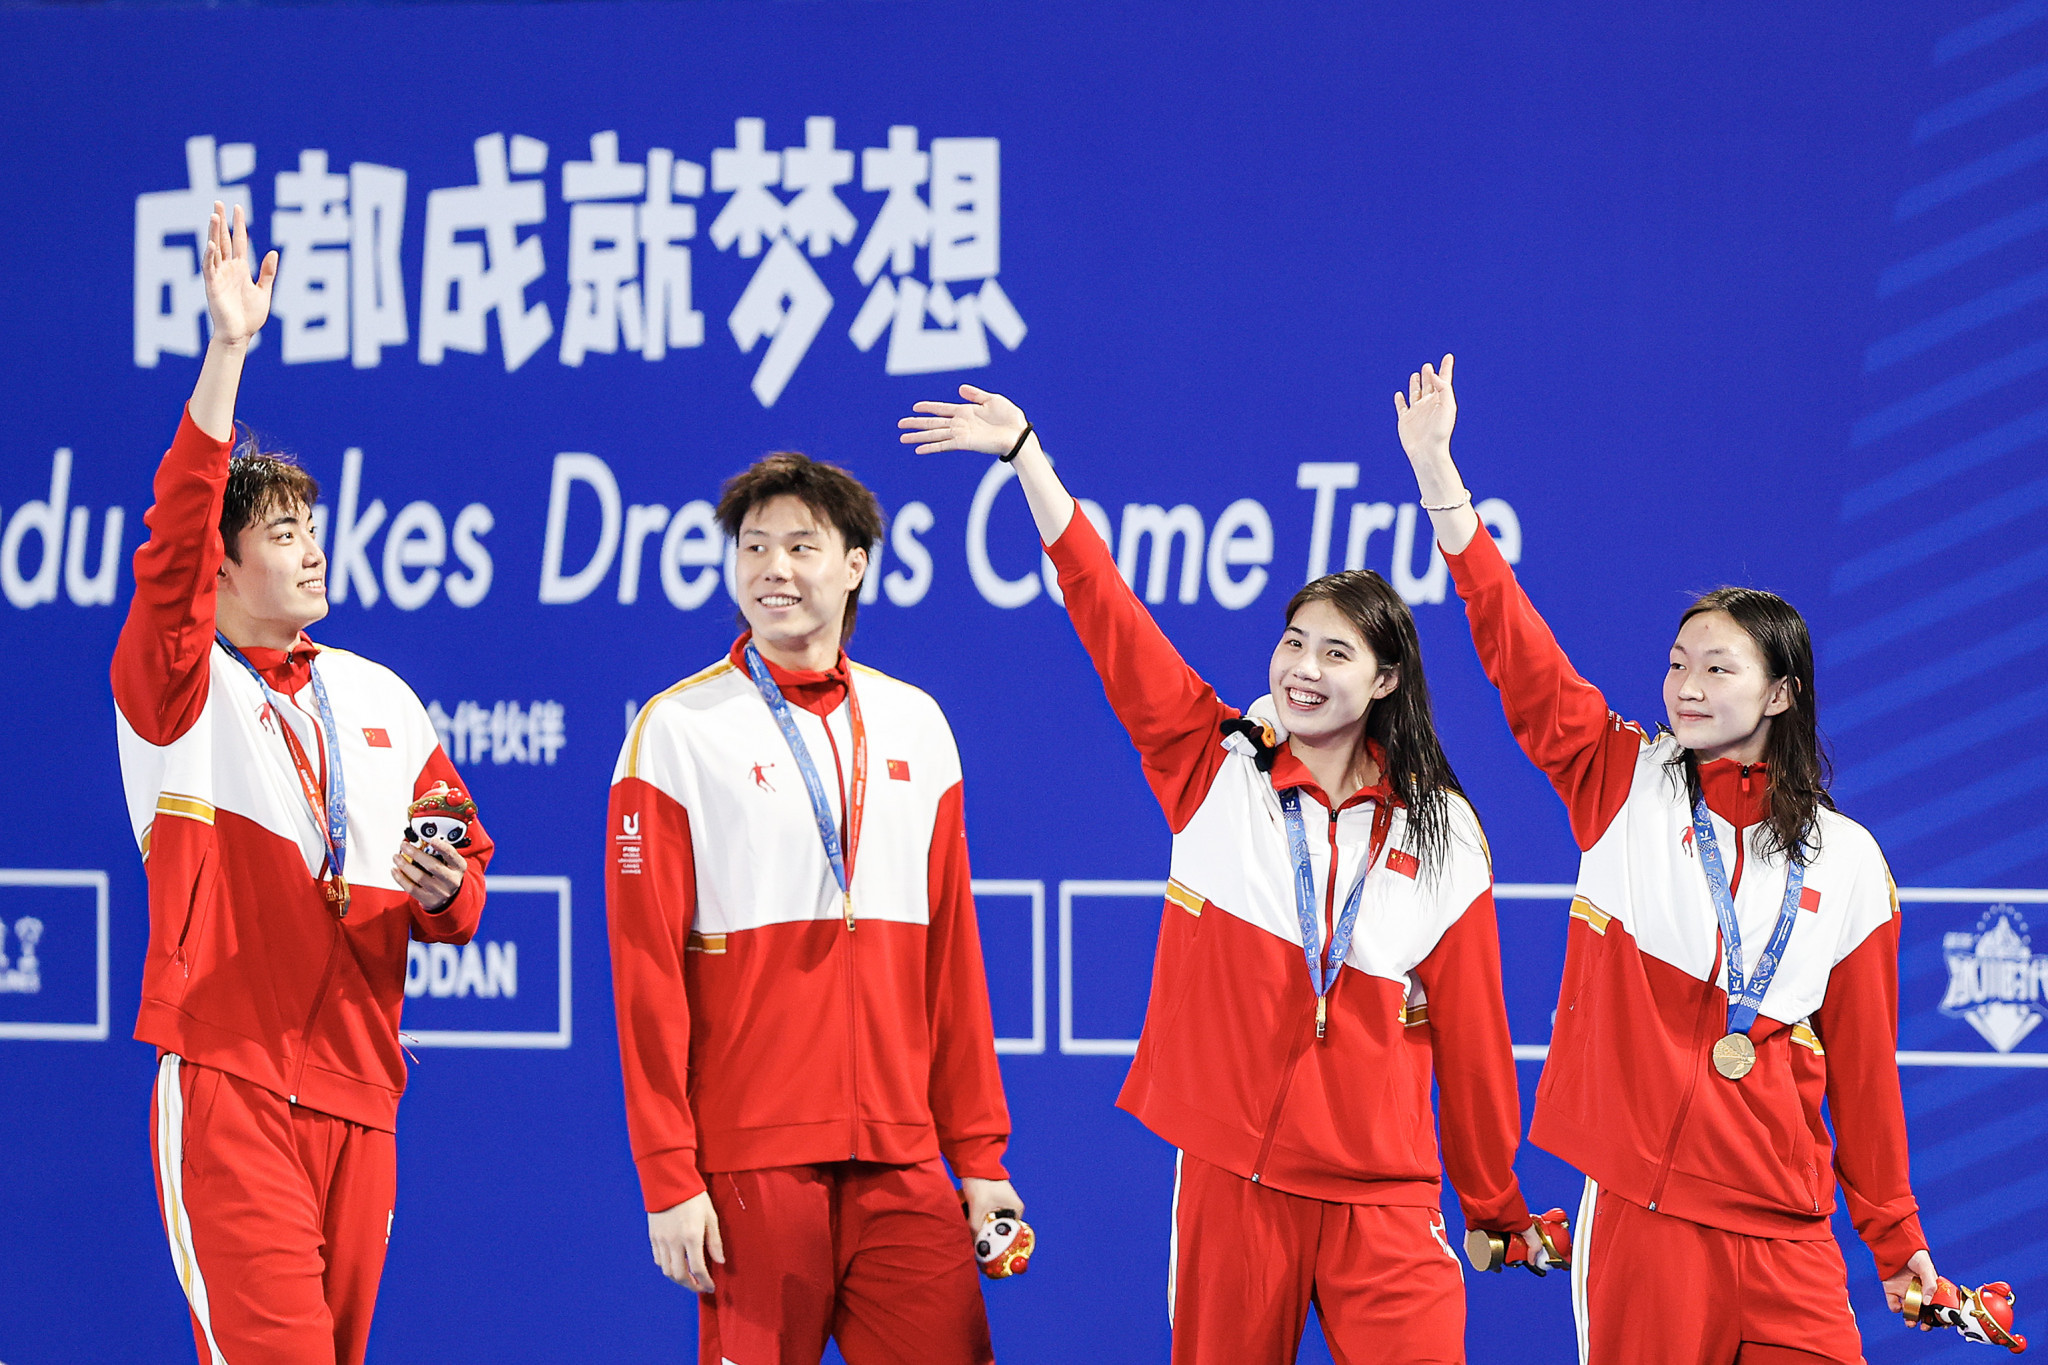 China's team enjoy the adulation of the crowd after their victory in swimming's 4x100m mixed medley relay ©FISU